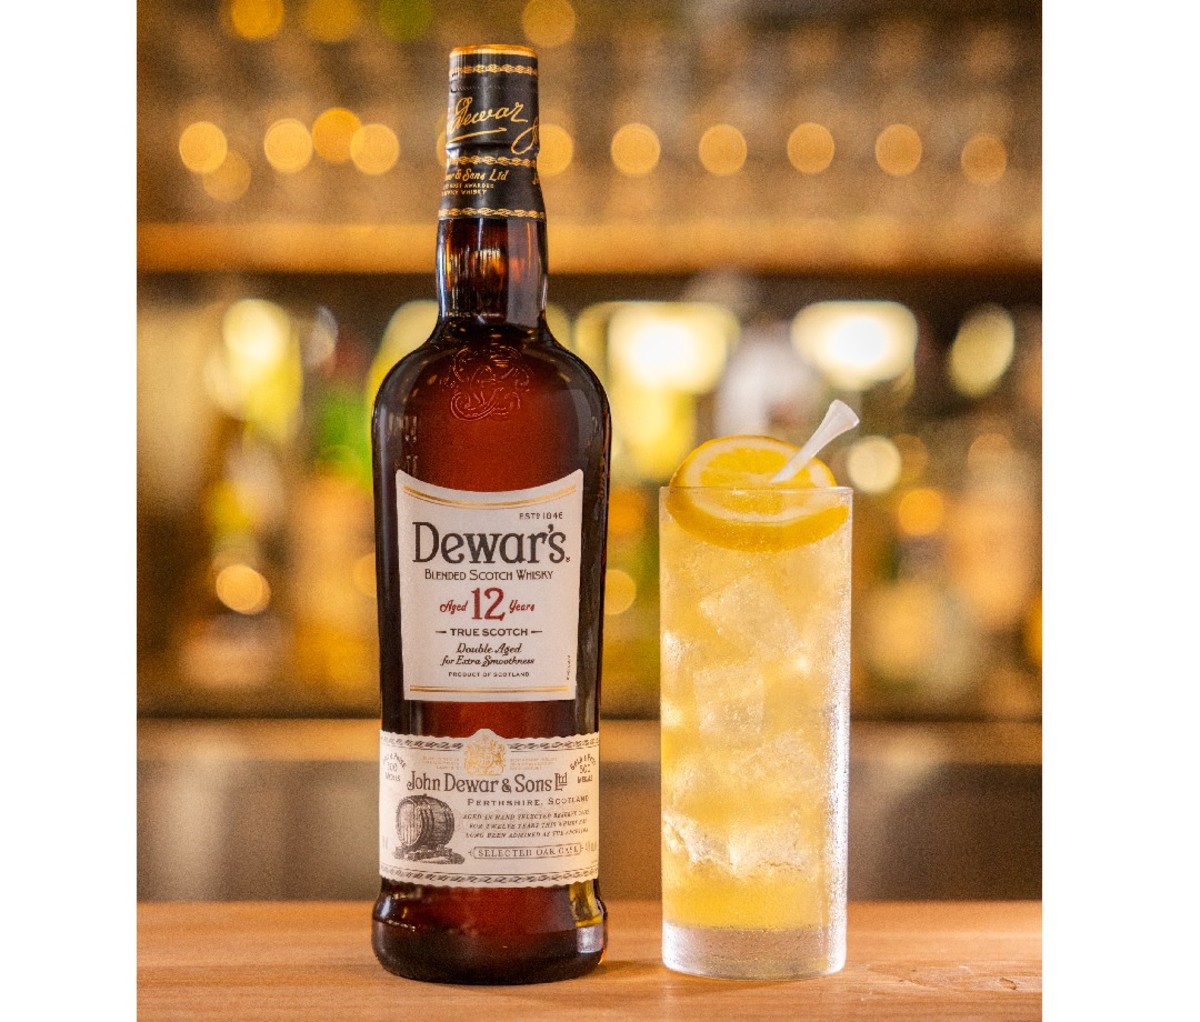 Prepared Lemon Wedge cocktail in a highball glass sits on the bar beside a bottle of Dewar's whisky